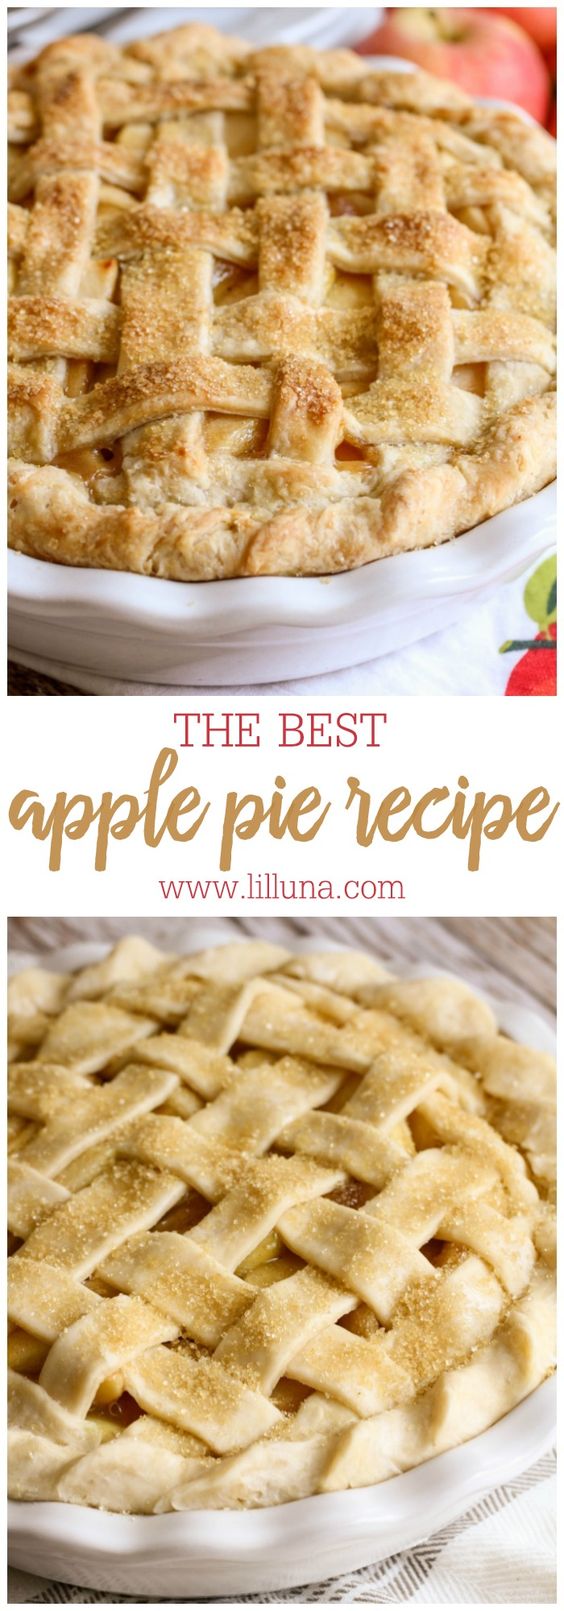 There's nothing like a slice of warm apple pie served with vanilla ice cream! This recipe for Homemade Apple Pie has proven to be the BEST apple pie recipe around. With a flaky, buttery crust made from scratch, and a gooey, sweet apple filling, this pie will not disappoint!